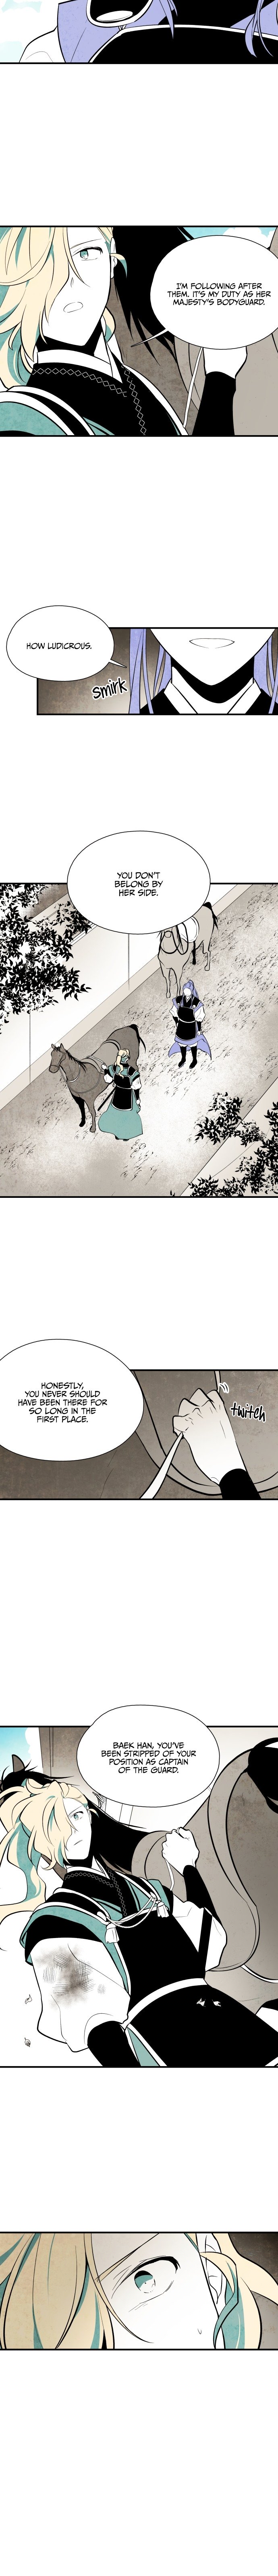 The Flower That Bloomed by a Cloud ch.63